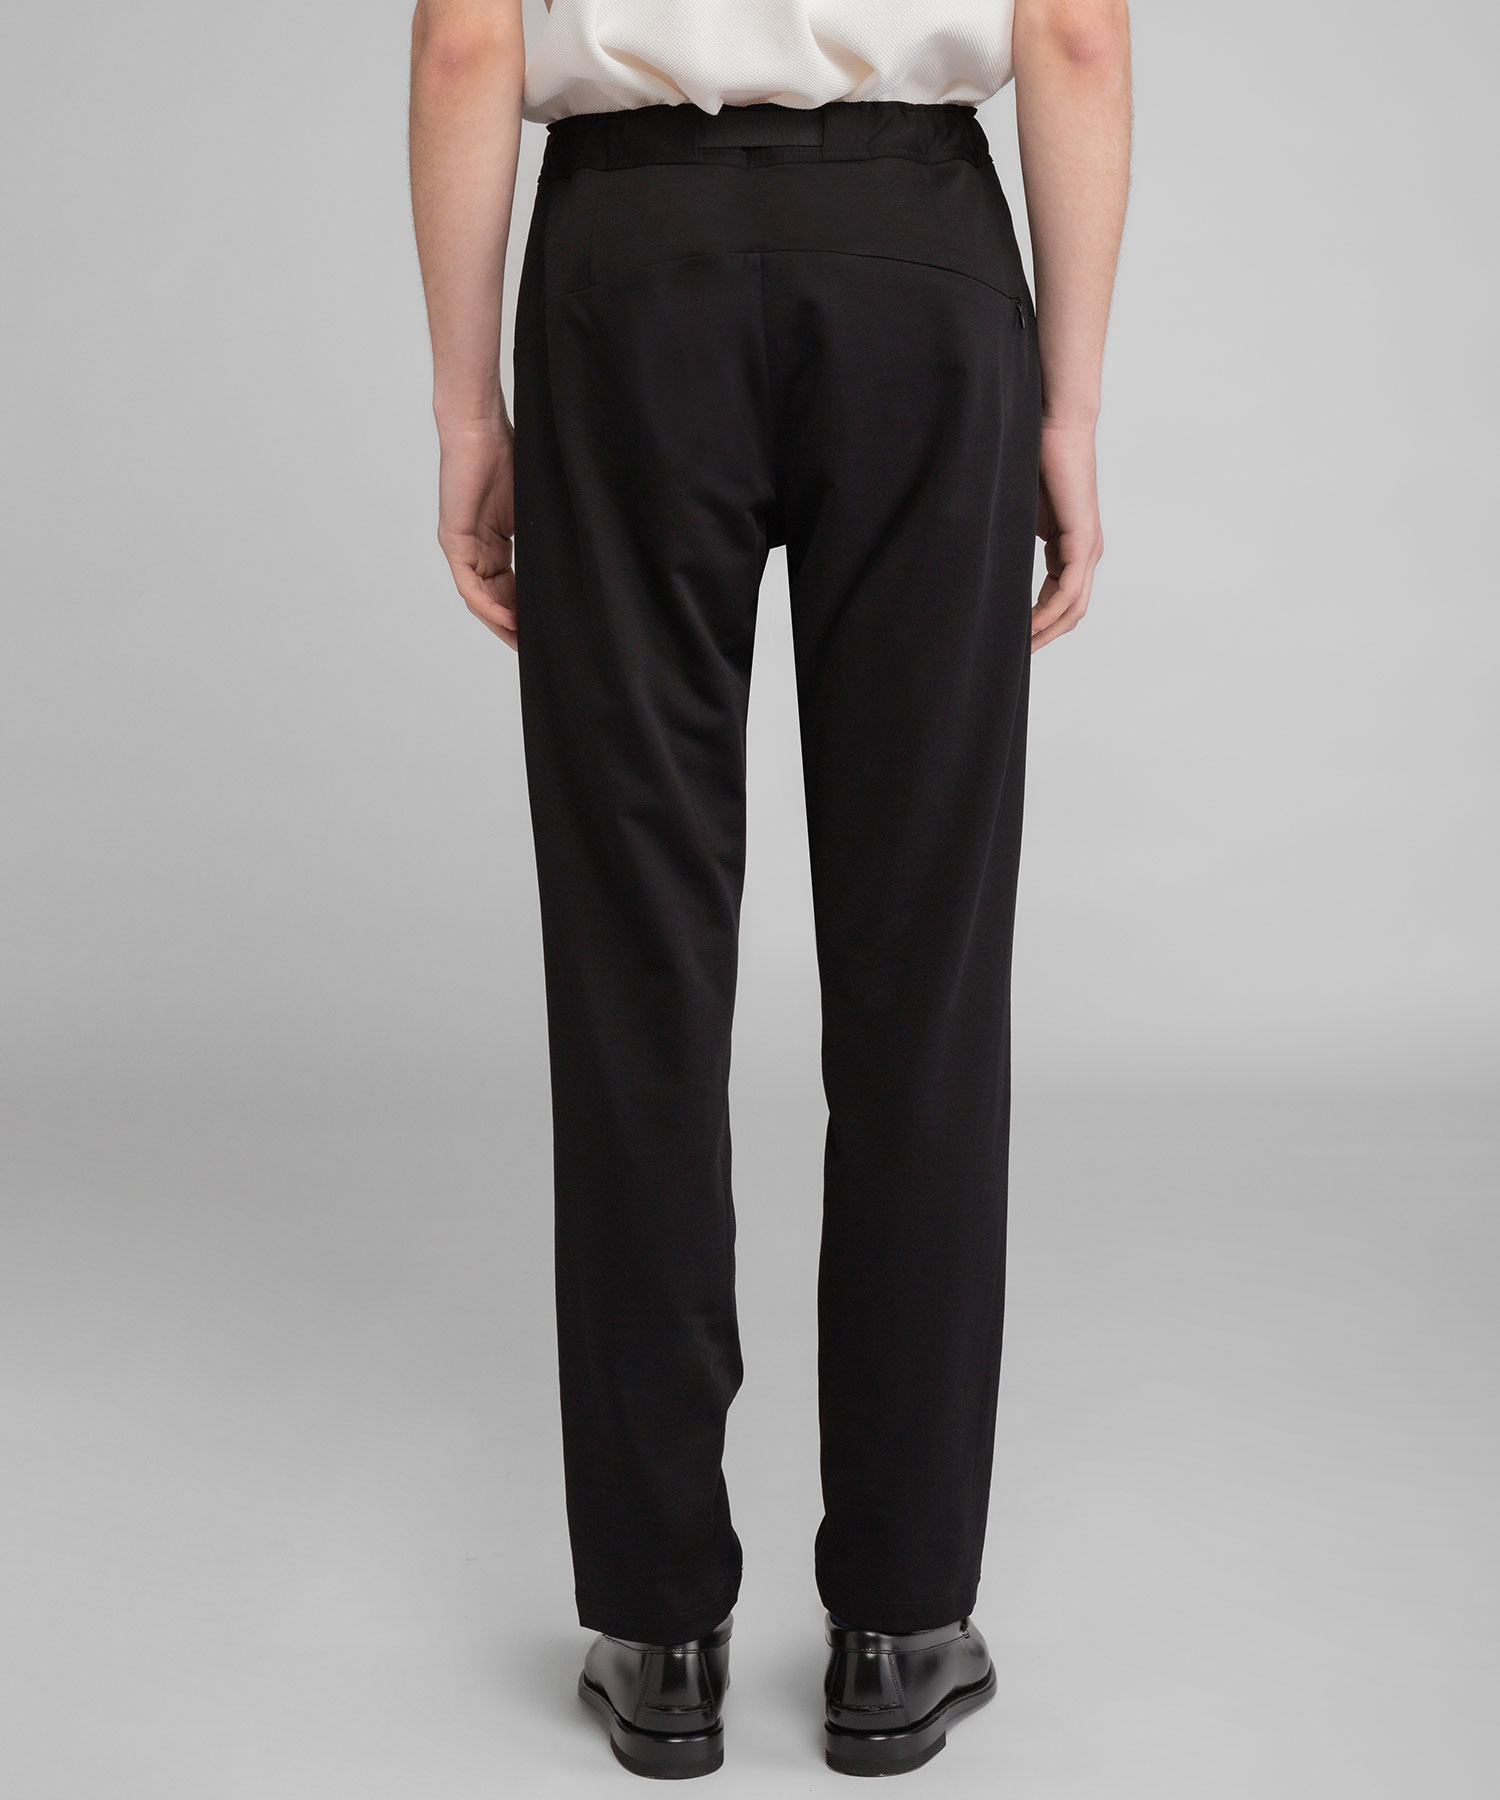 LIGHT WEIGHT DOZUME URAKE SLIM FIT TROUSERS（H.I.P. by SOLIDO